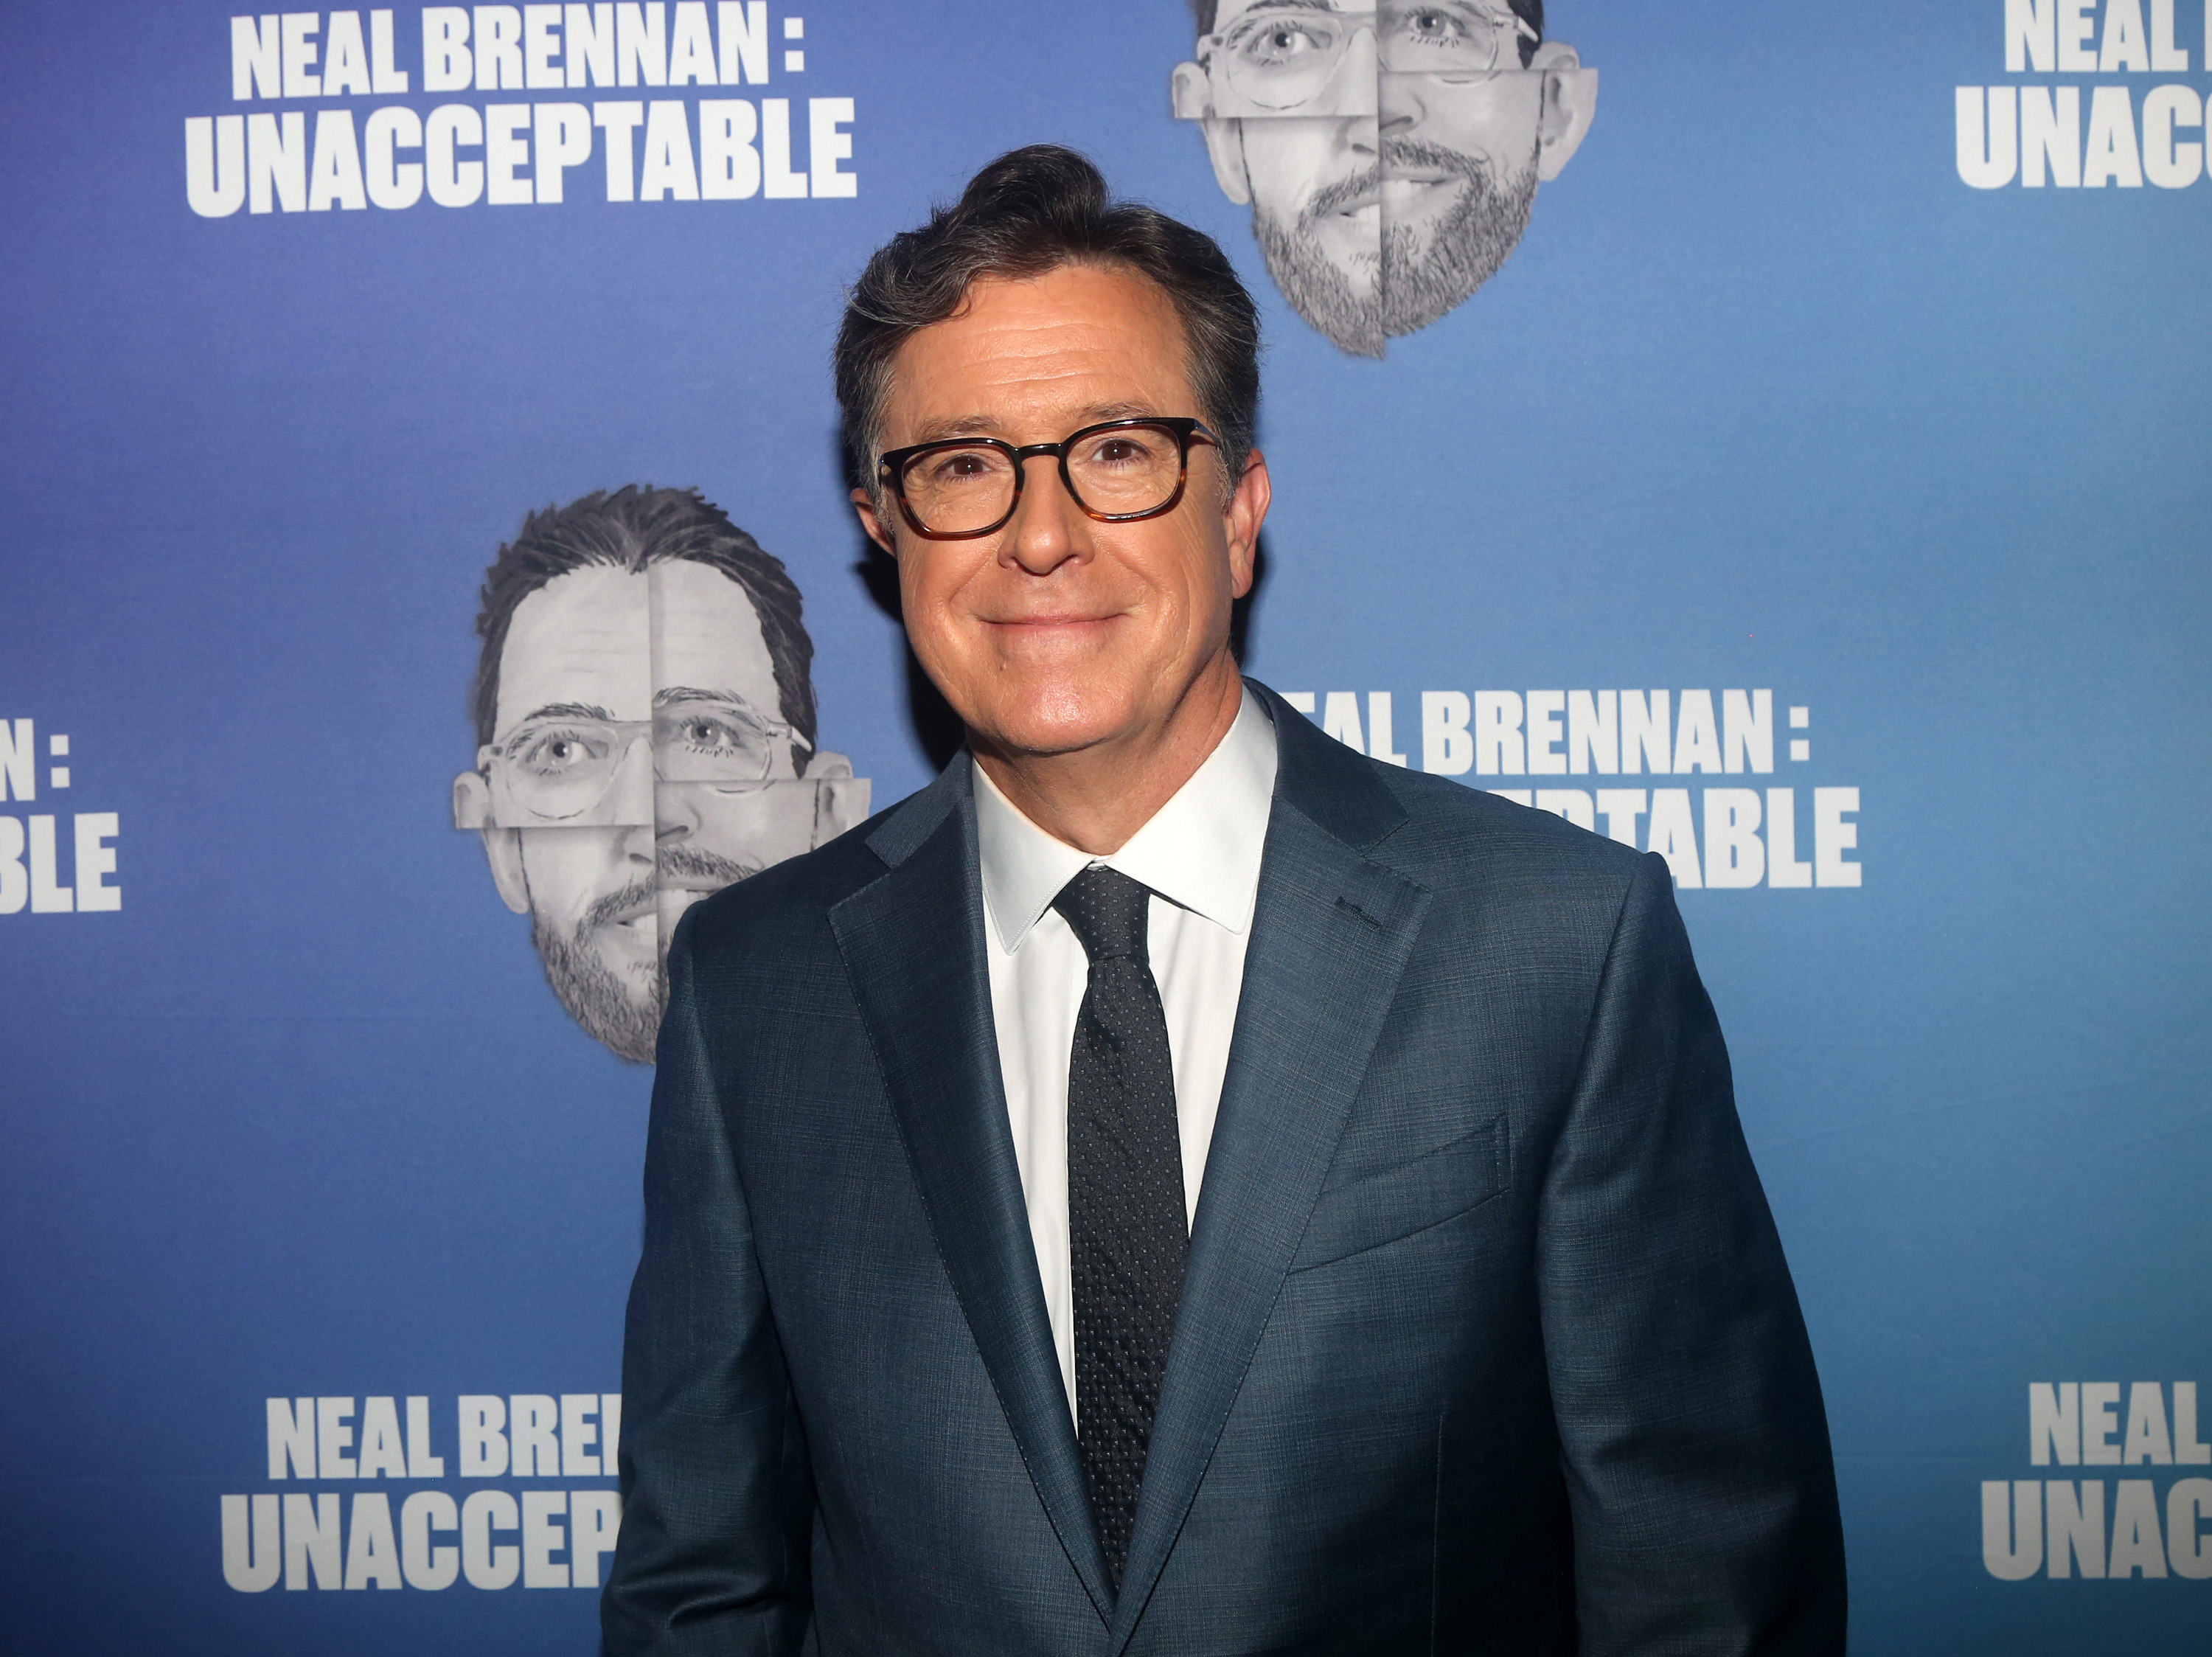 Stephen Colbert at the opening night arrivals for "Neal Brennan's Unacceptable" on September 9, 2021, in New York | Source: Getty Images